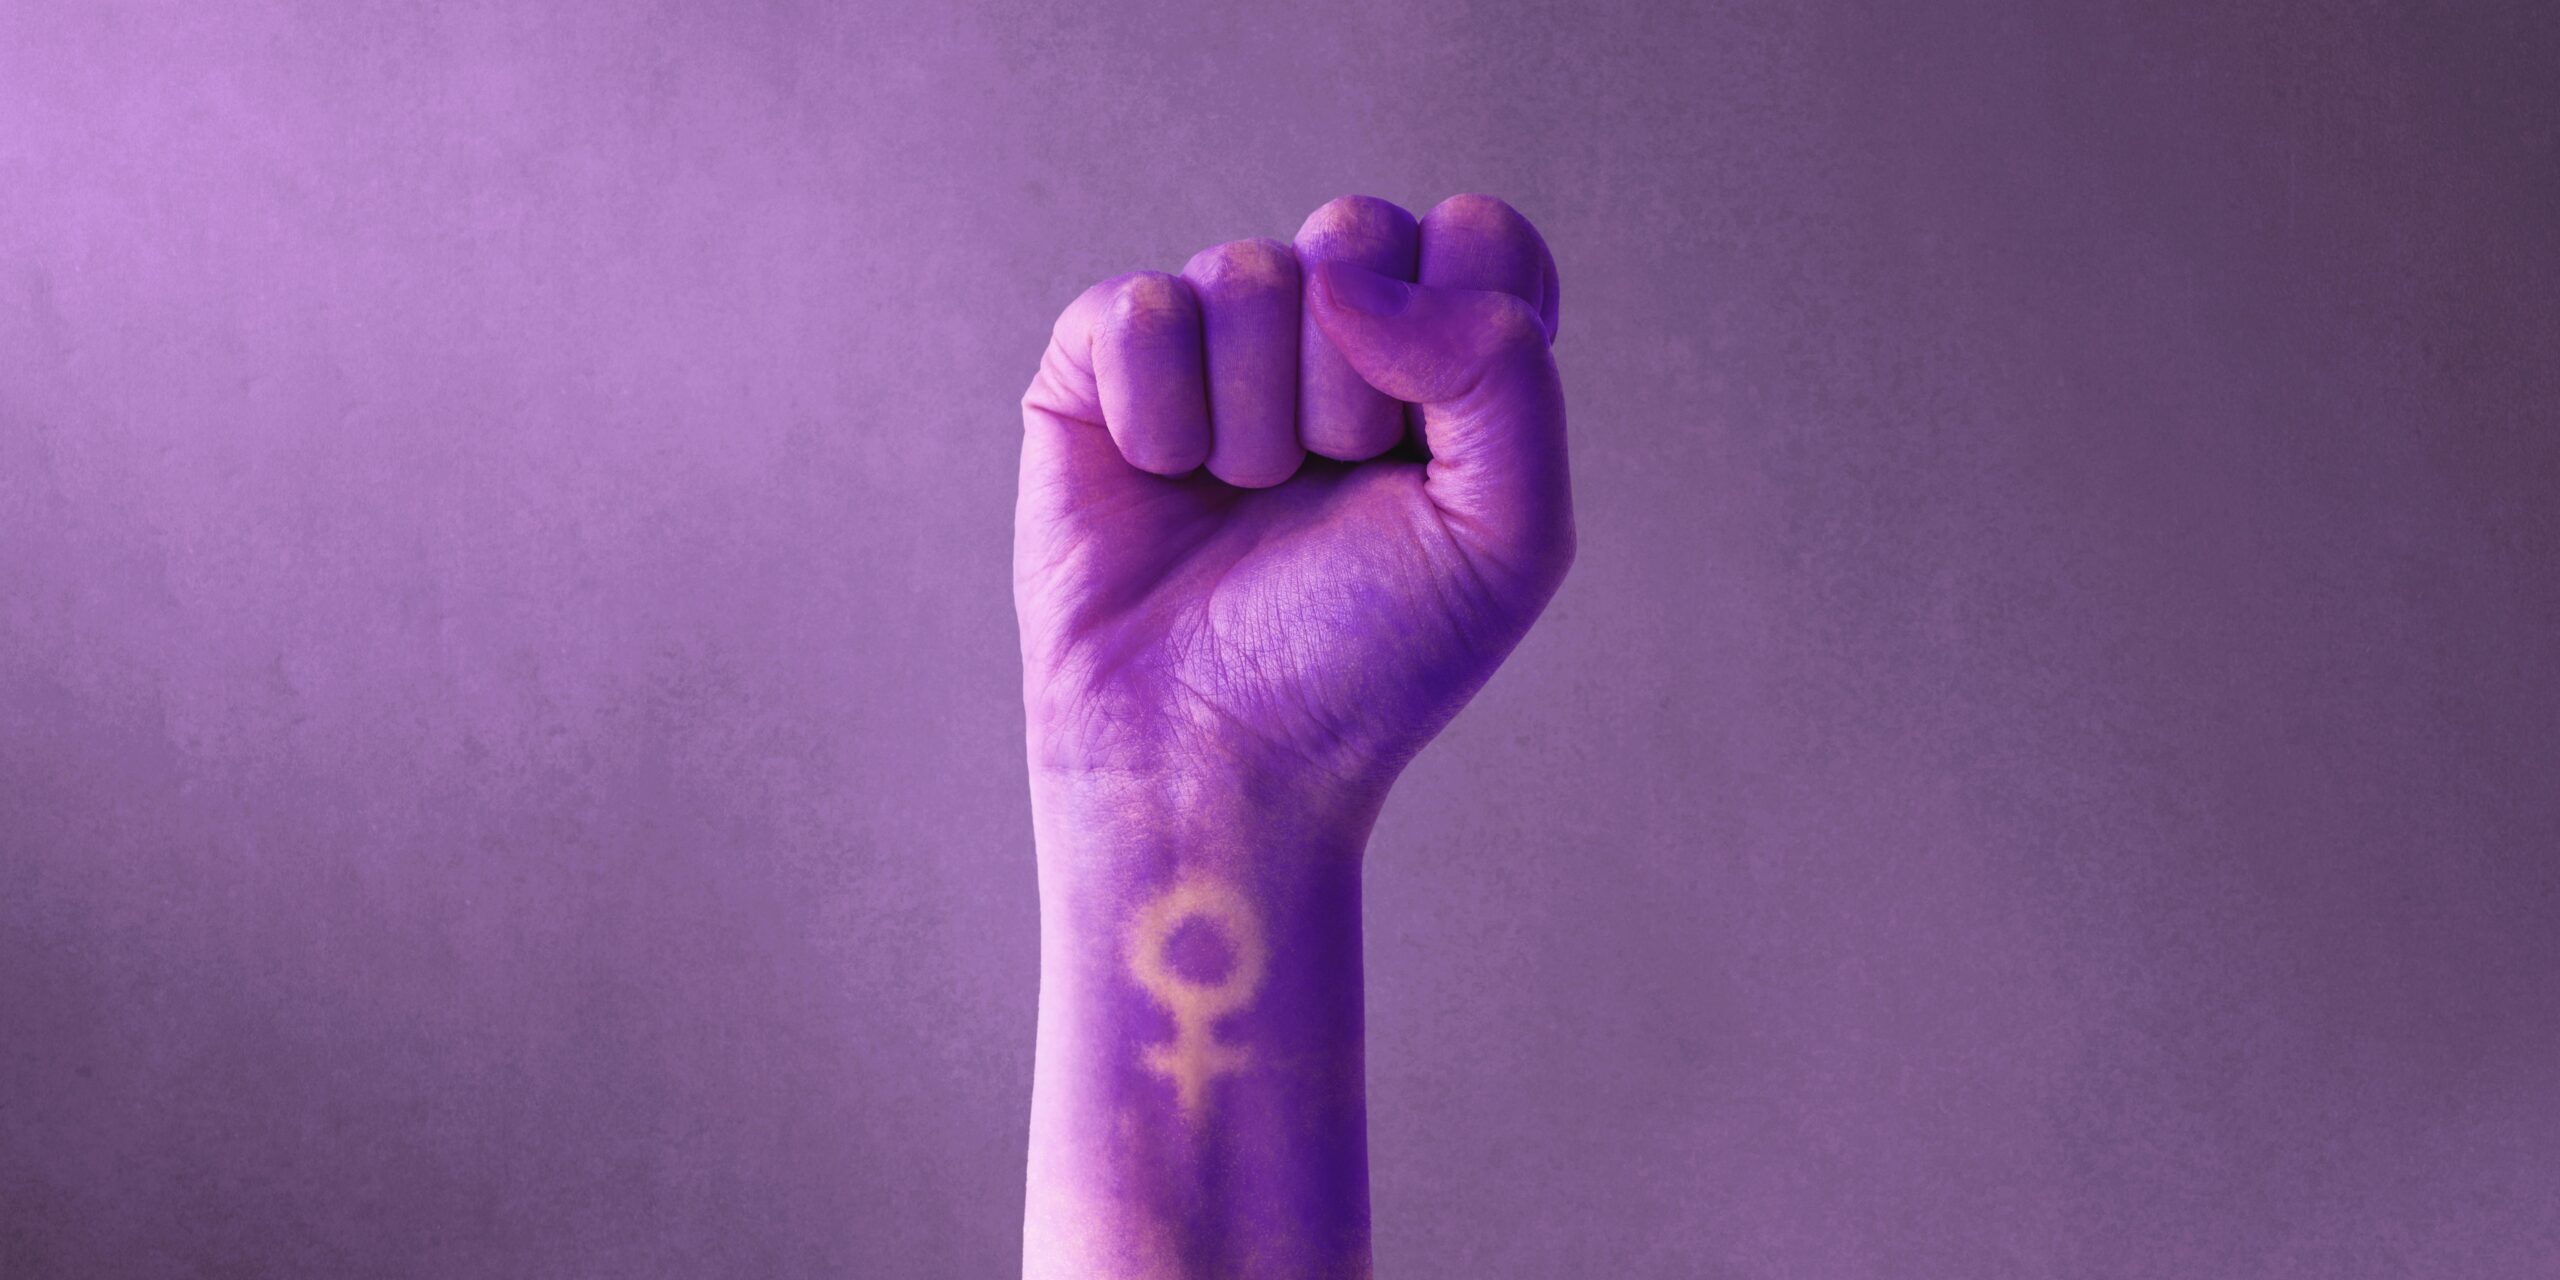 IWD23: Fighting for Gender Equality in the Workplace